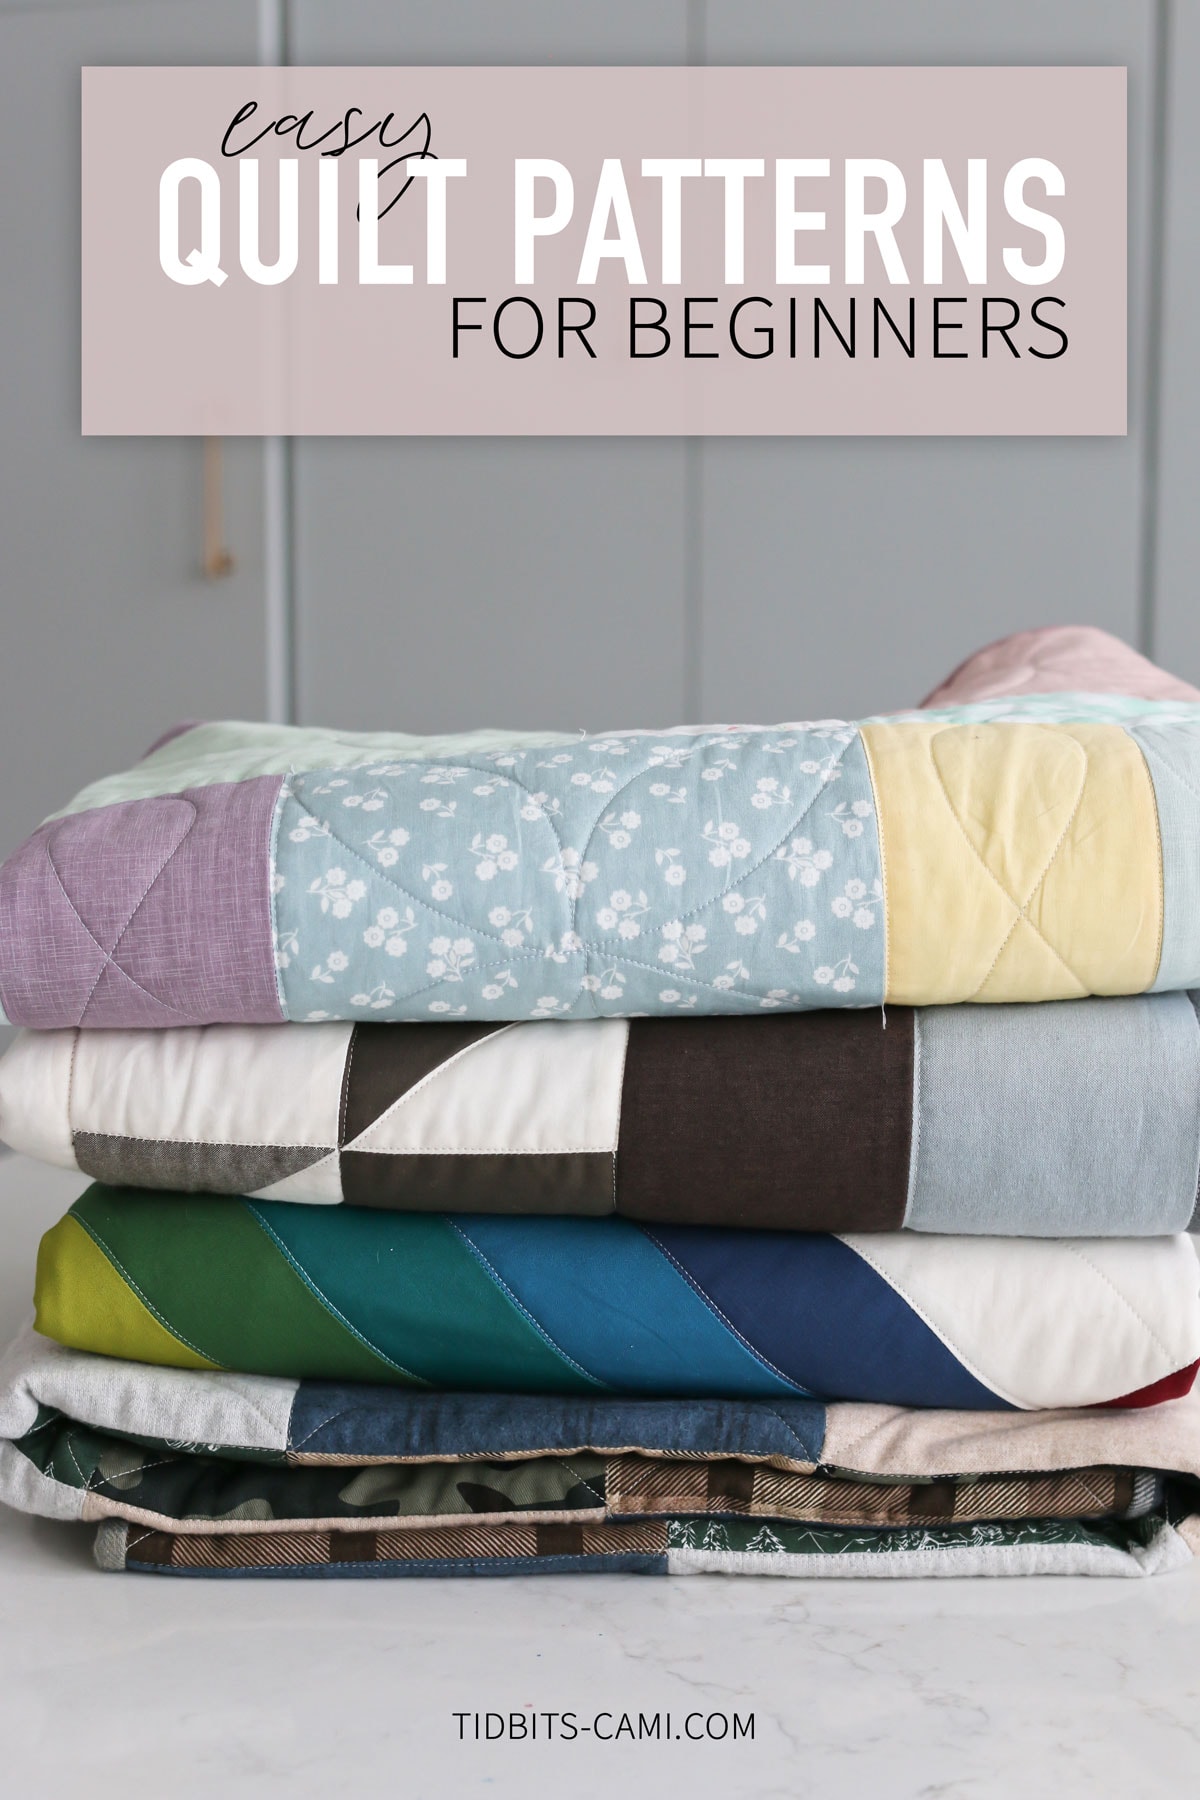 10 Easy Quilt Patterns for beginners